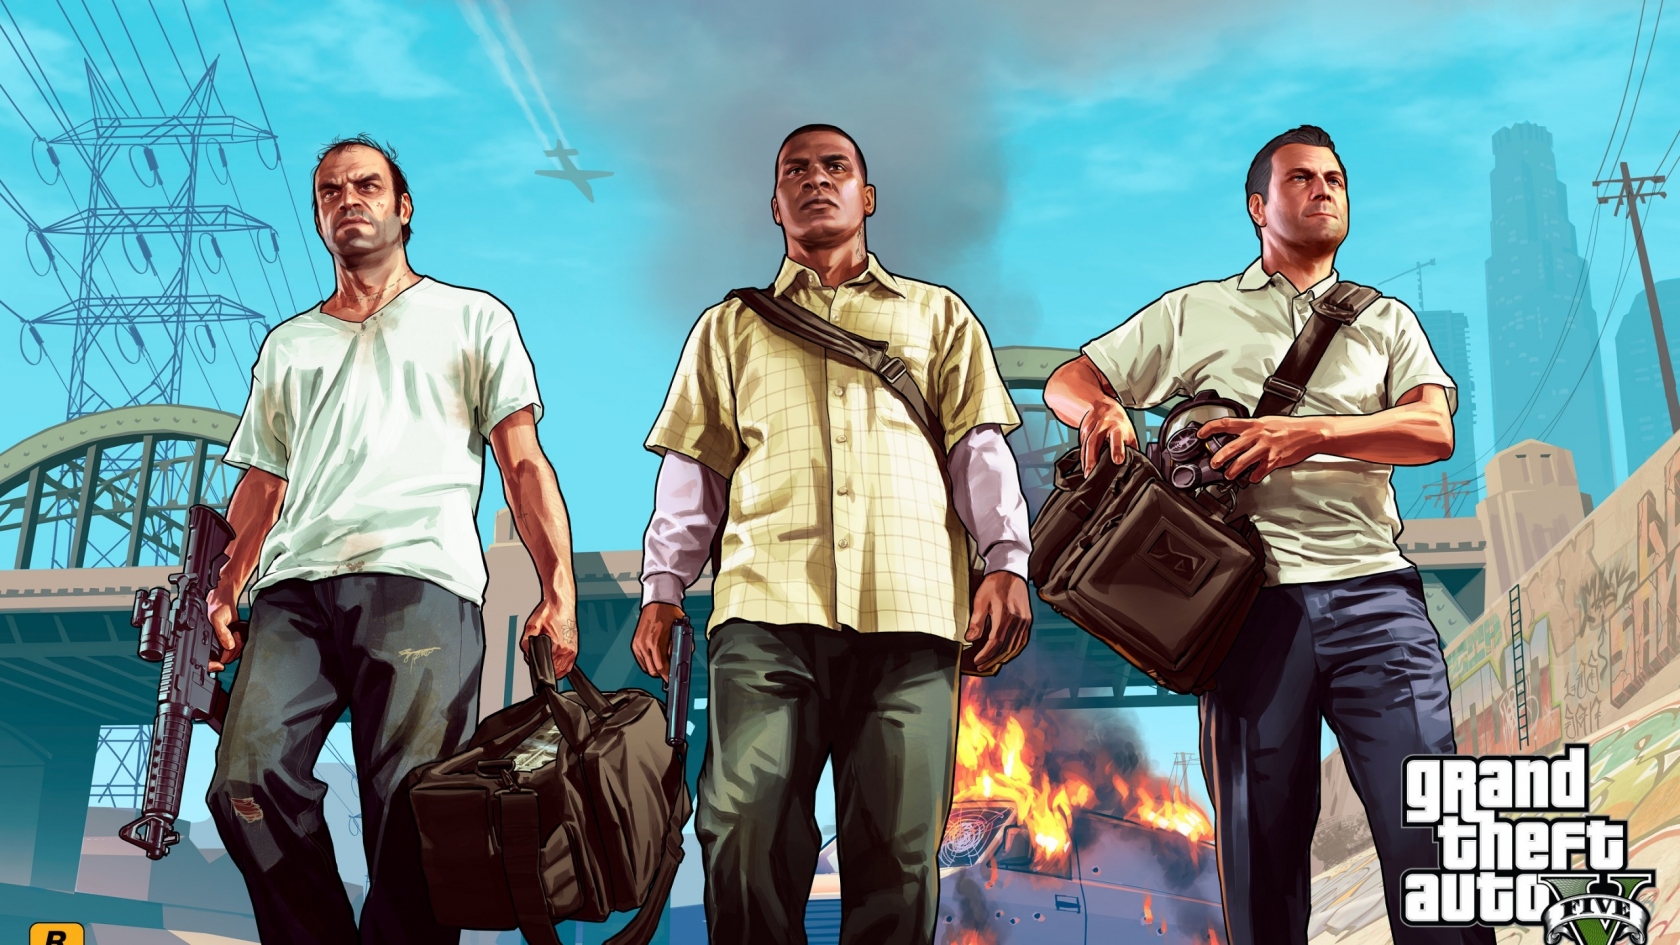 Grand Theft Auto Vice City for 1680 x 945 HDTV resolution